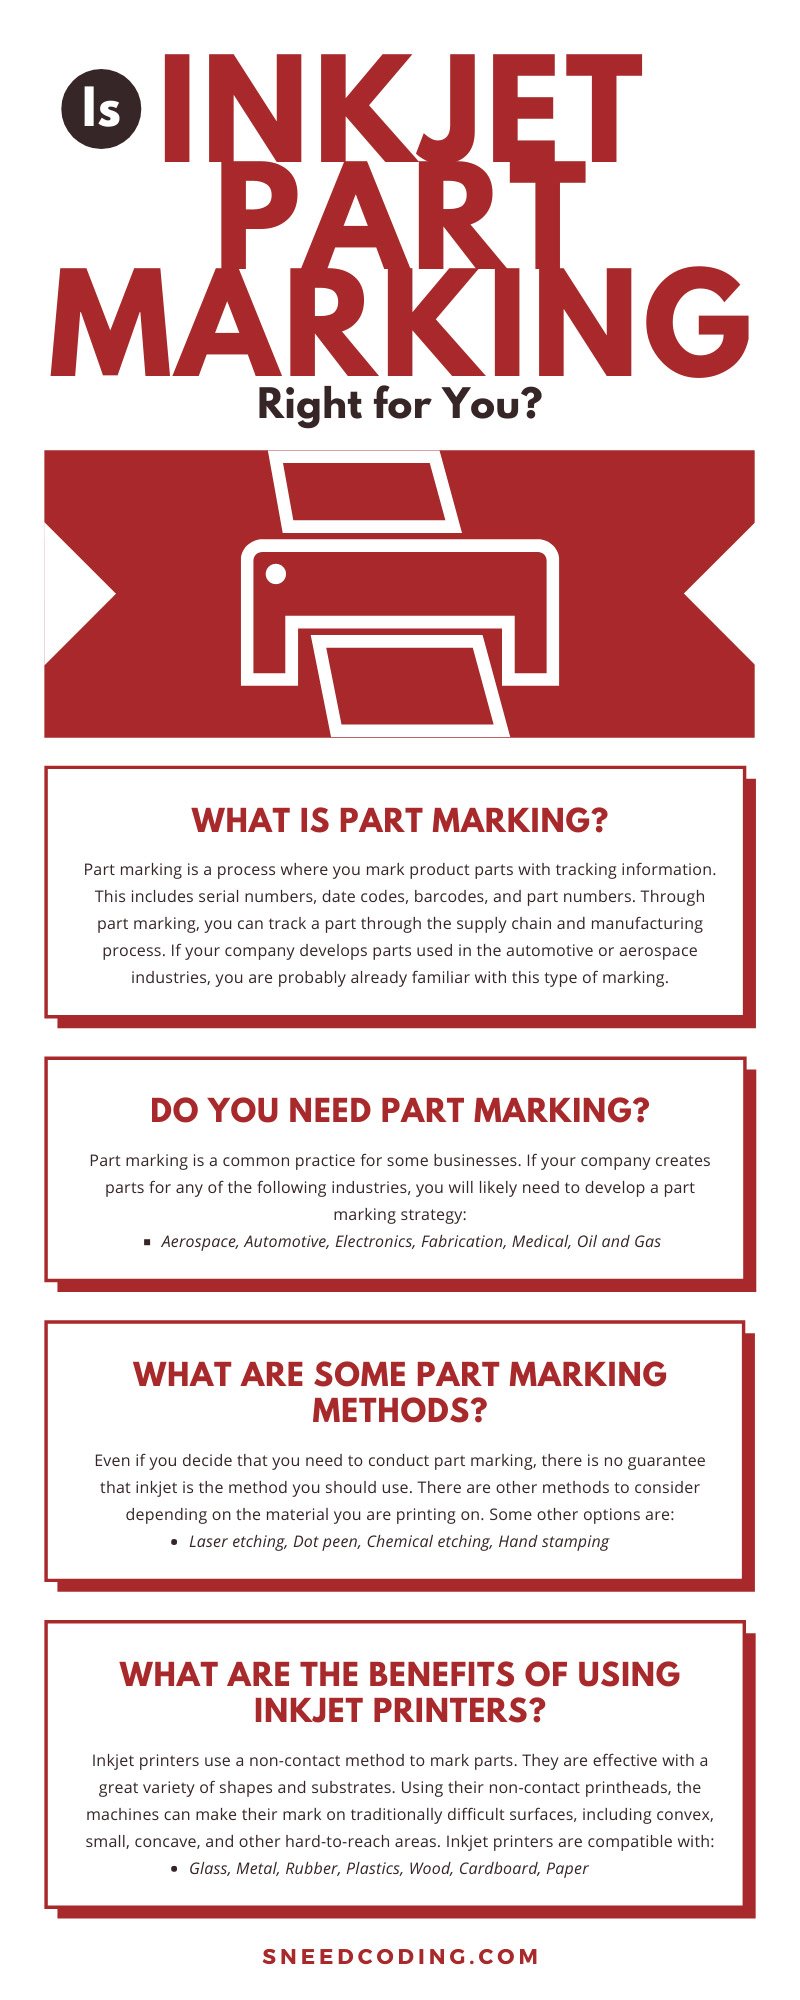 Is Inkjet Part Marking Right for You?